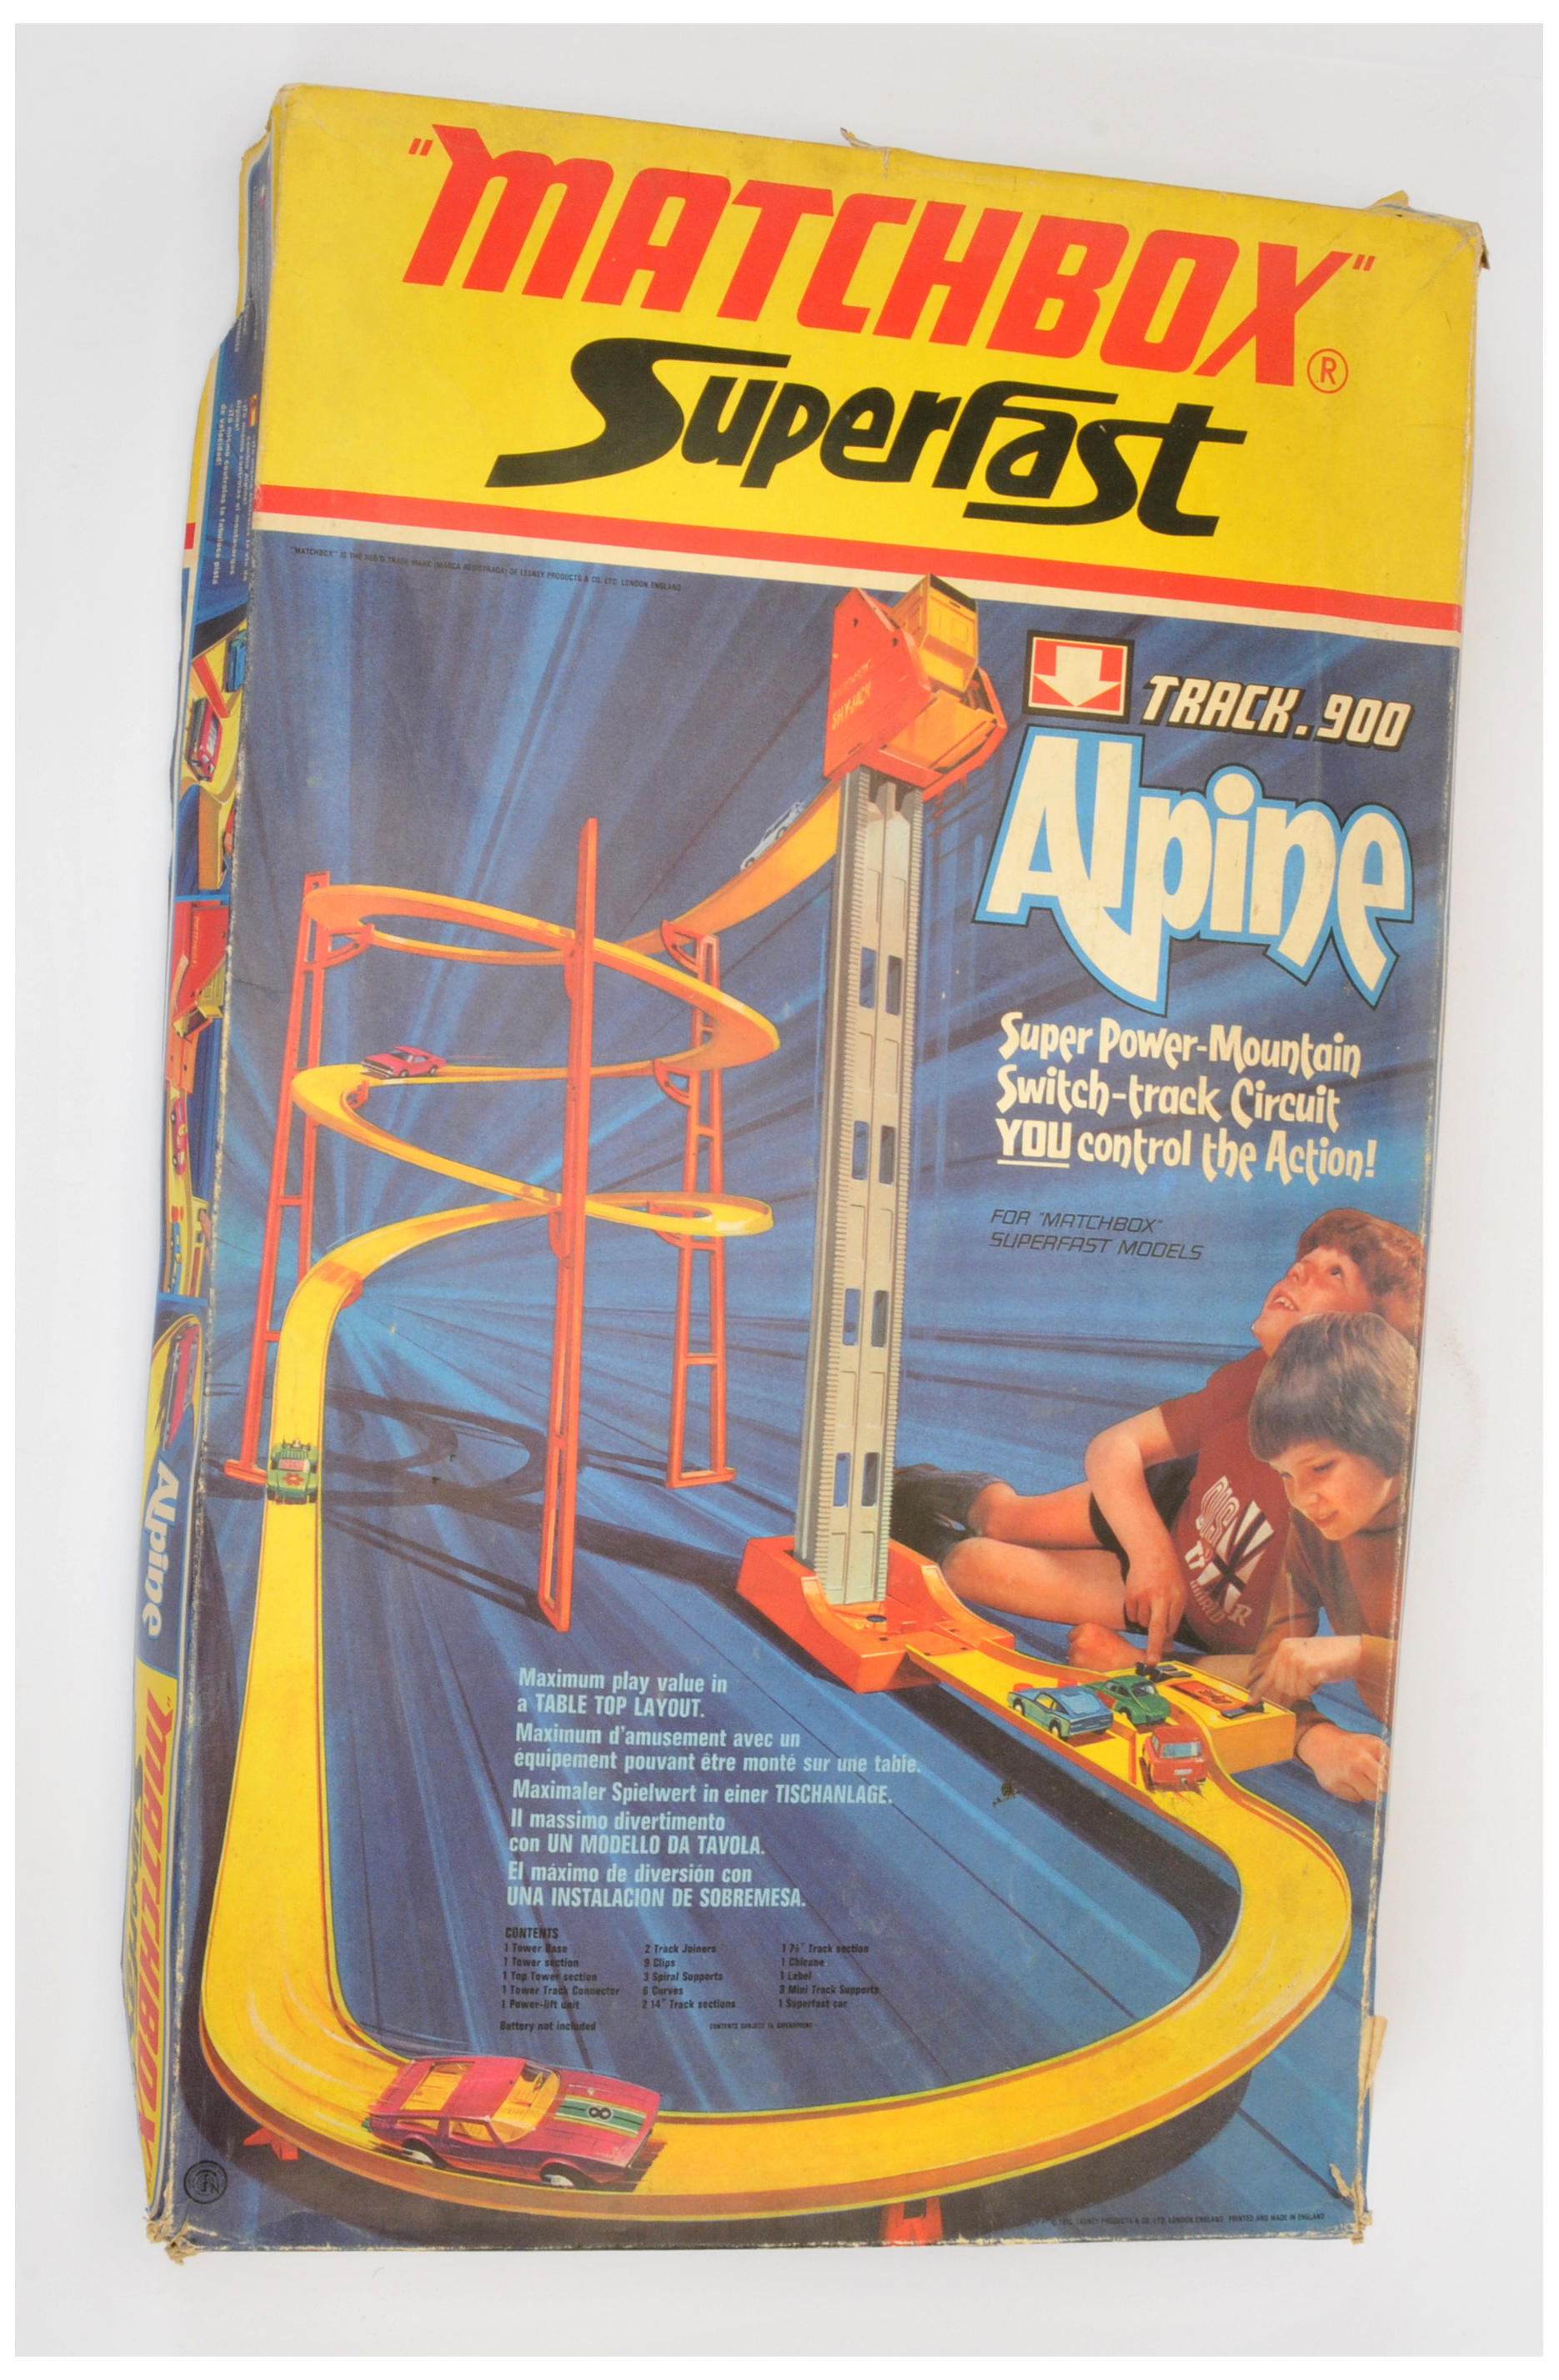 Matchbox Superfast Alpine Track Set 900 - appears to be complete with most components, including ...